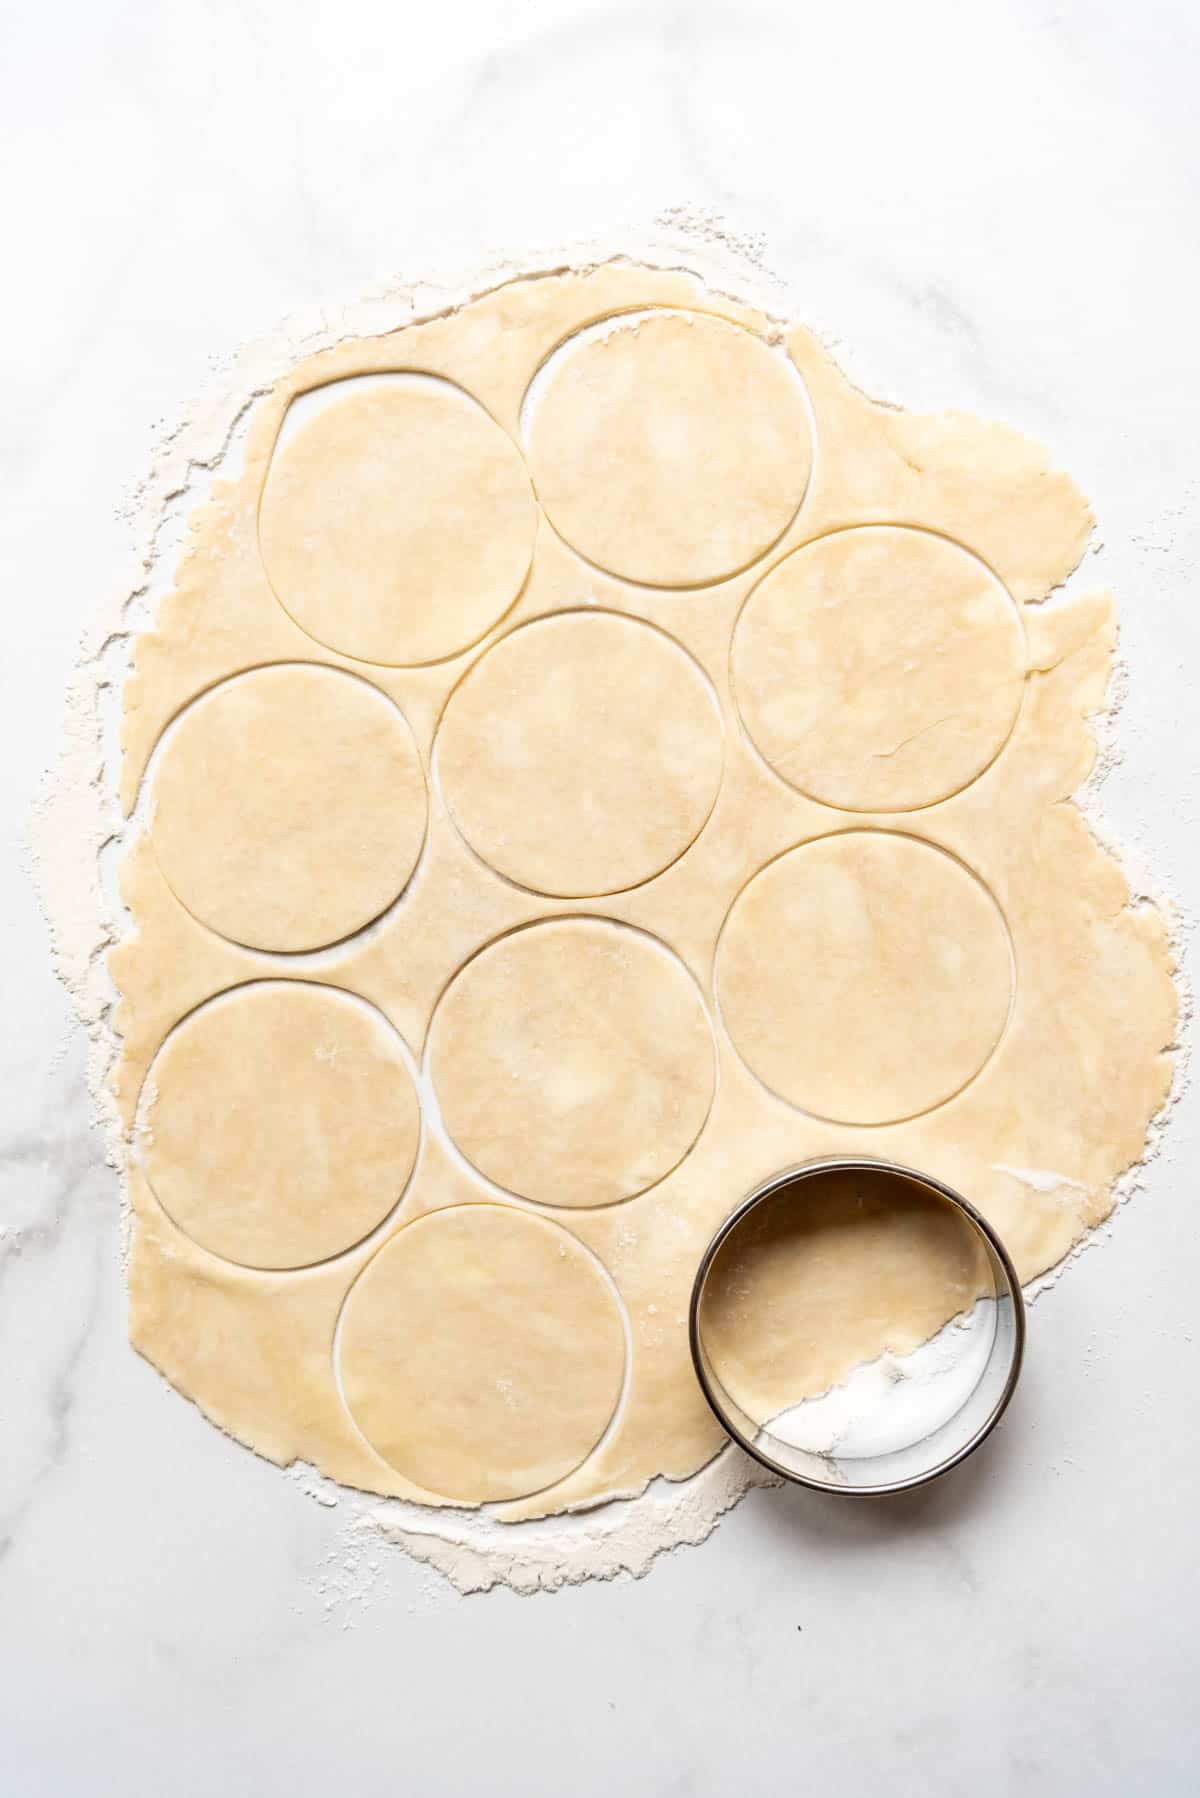 Cutting out circles of pie crust.